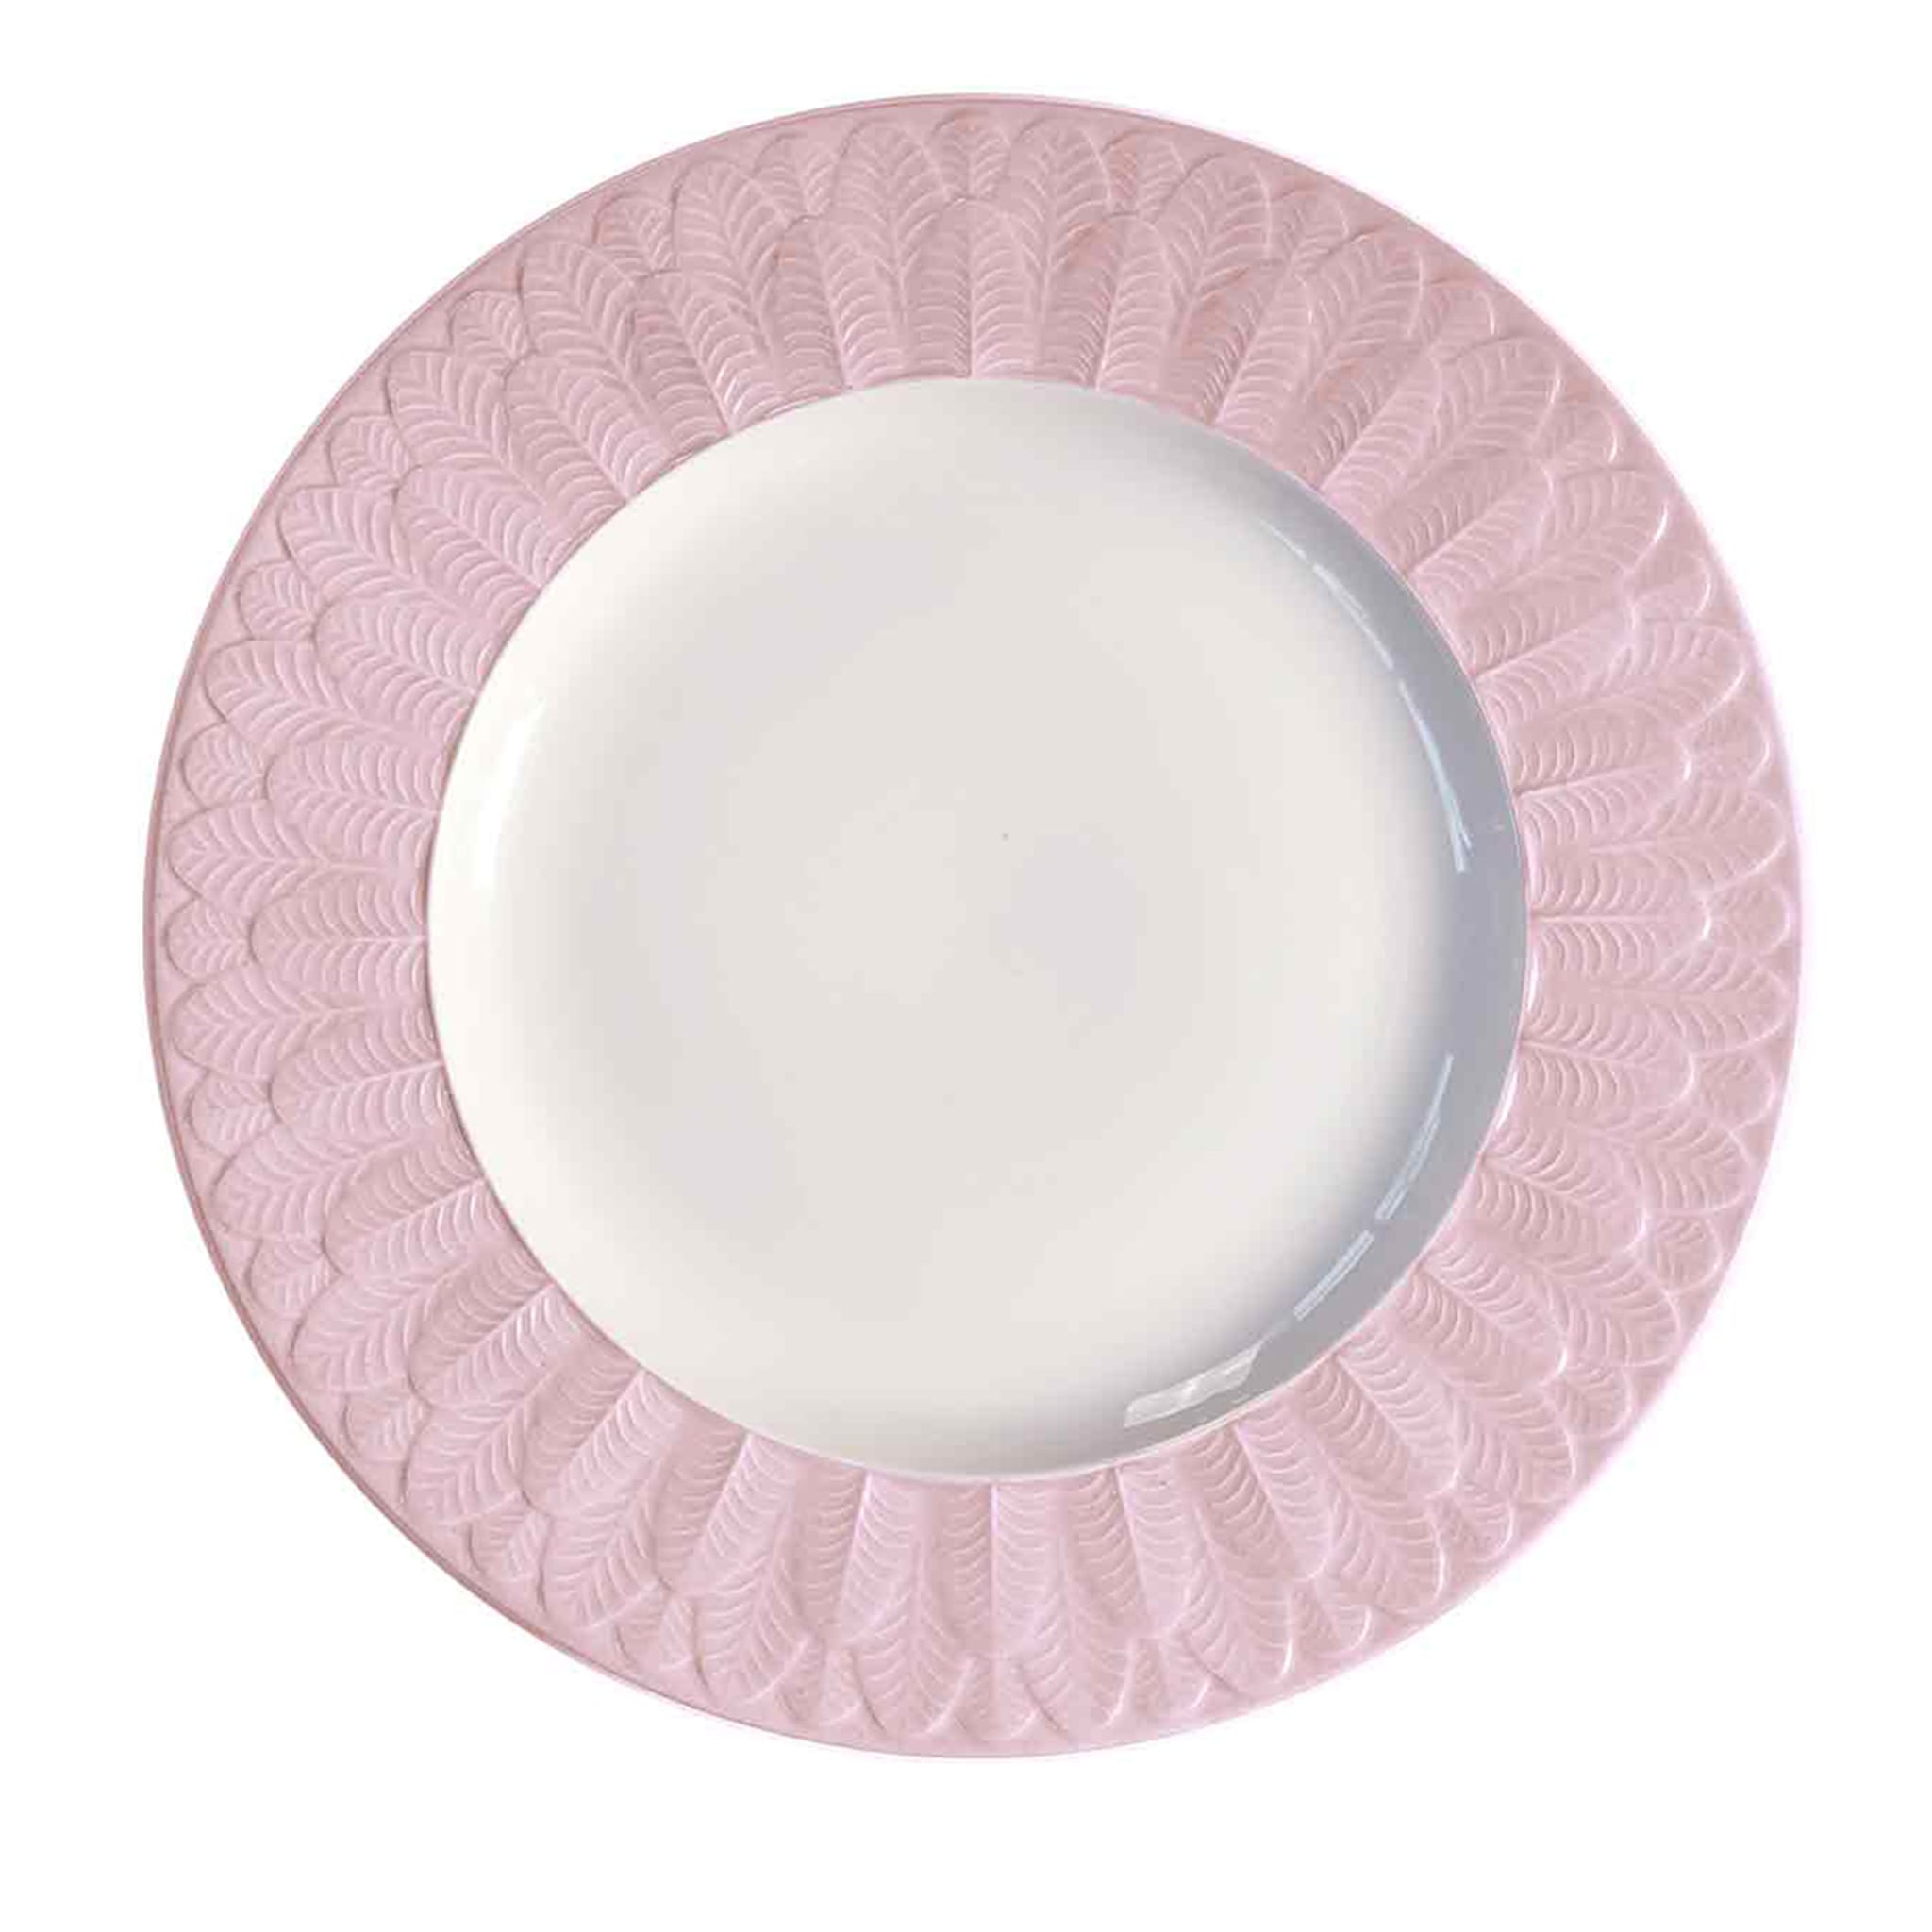 PEACOCK DINNER PLATE - PINK - Main view